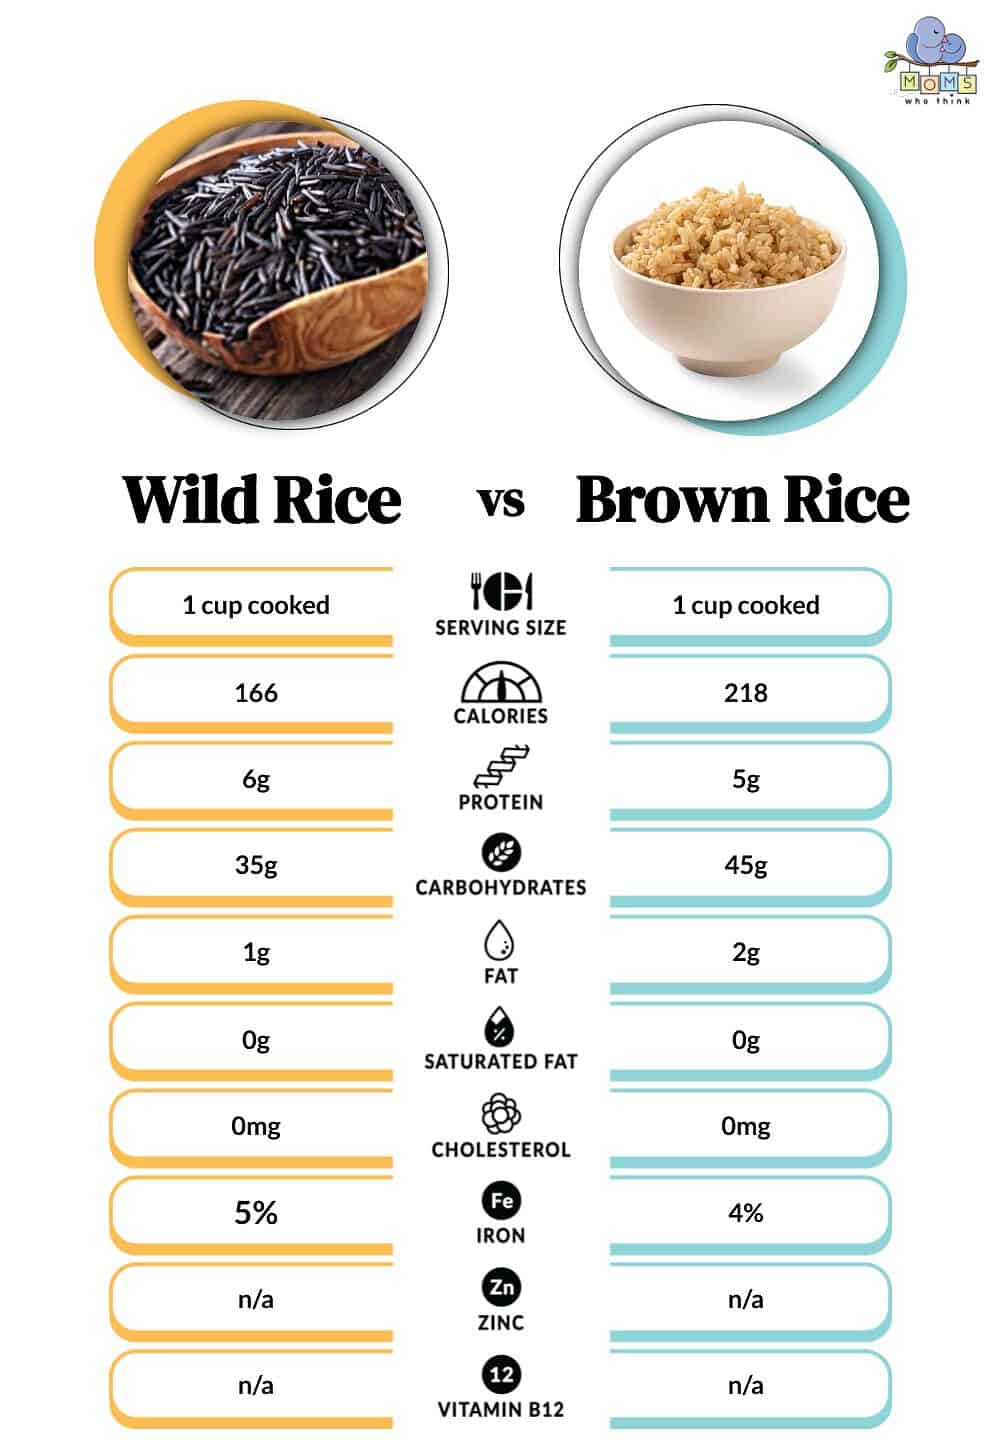 Wild Rice vs Brown Rice Nutritional Facts